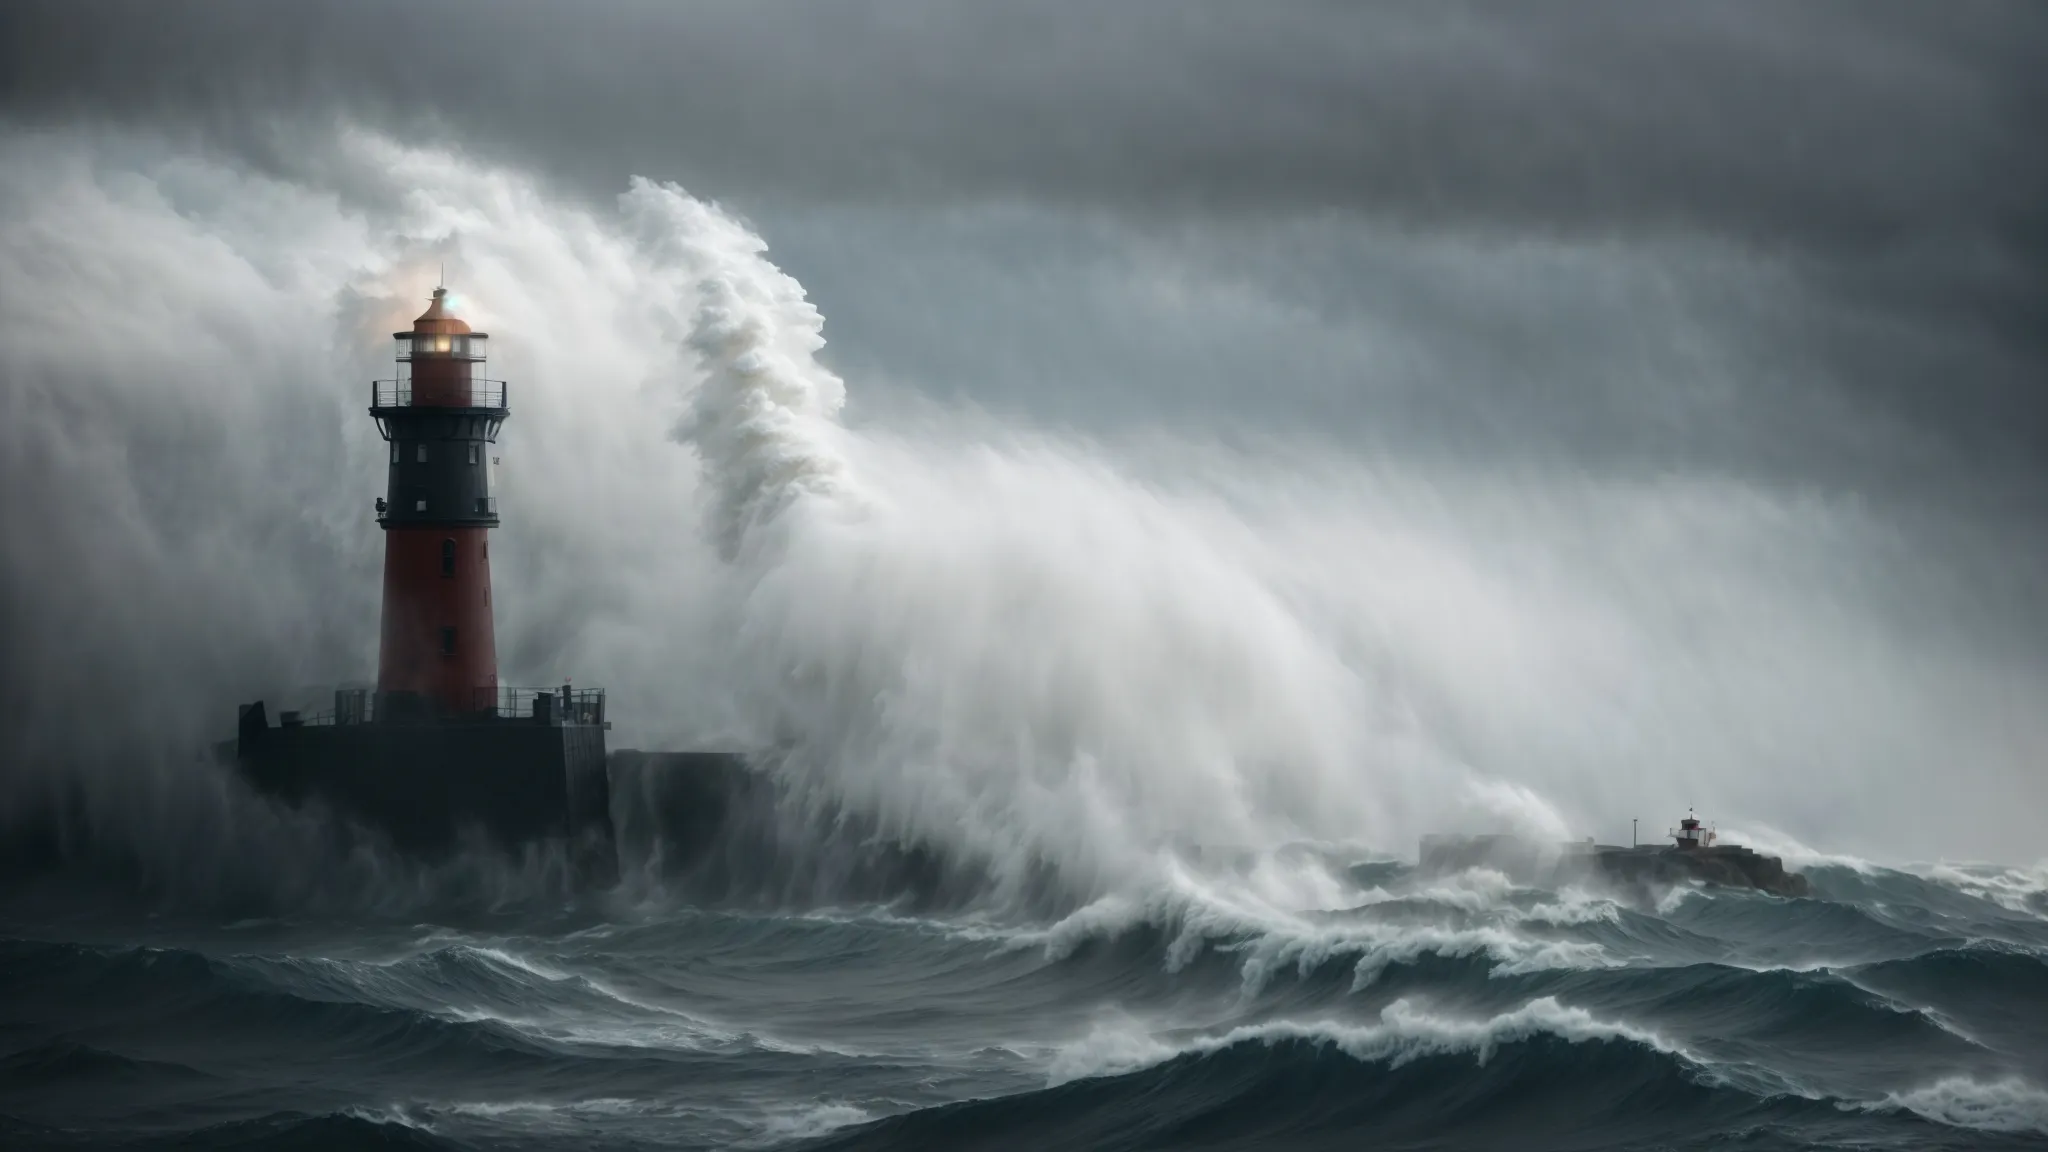 a lighthouse stands tall amidst a stormy sea, its beam cutting through the fog to guide ships safely to shore.